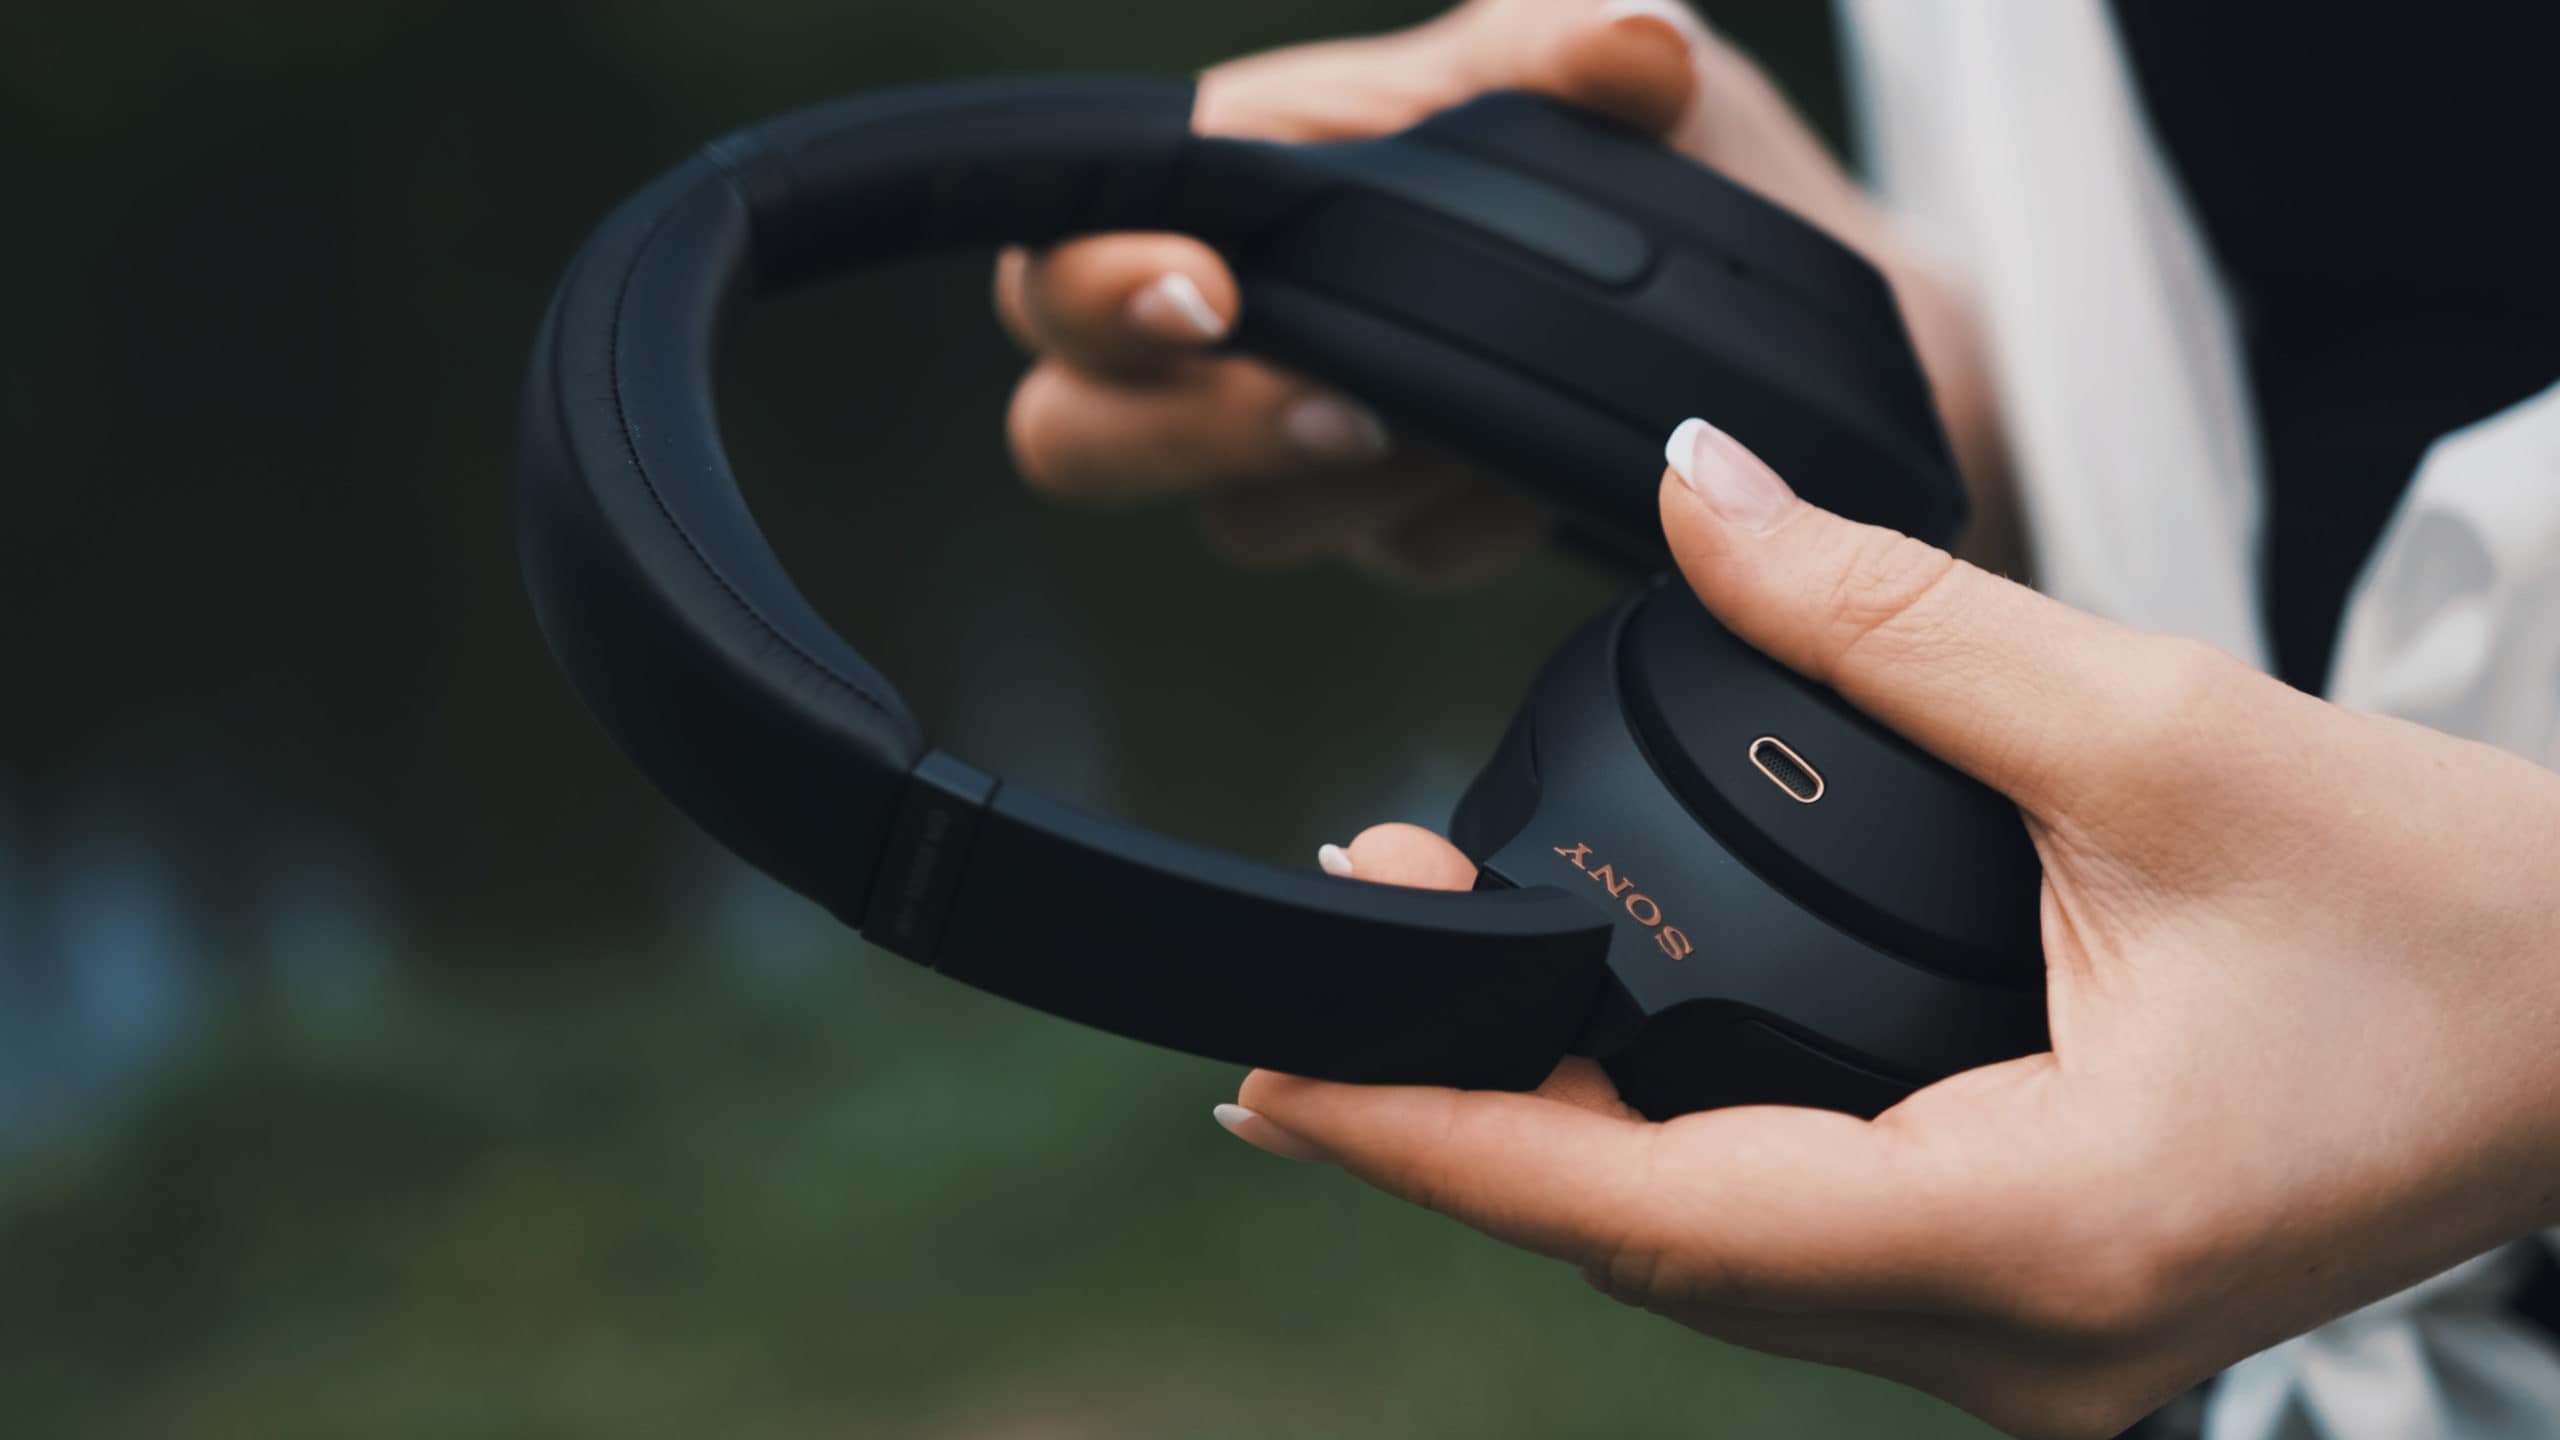 How To Connect Sony Over-Ear Headphones